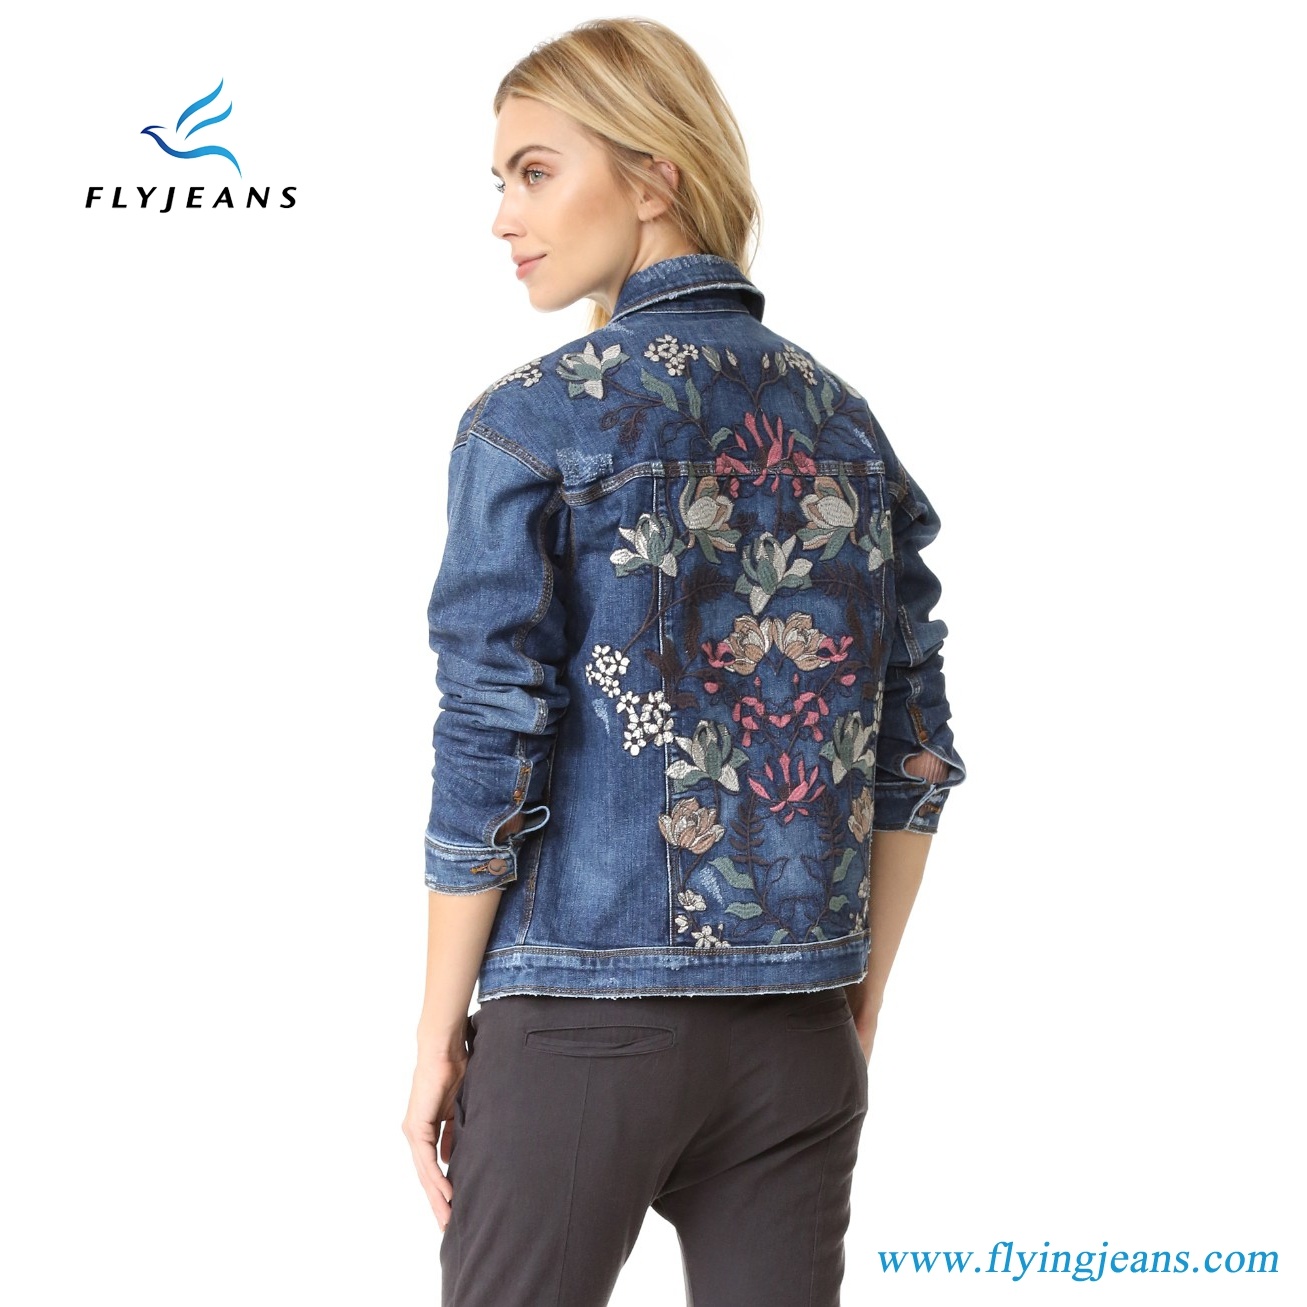 Fashion Woman Short Denim Jacket with Intricate Floral Embroidery at Back